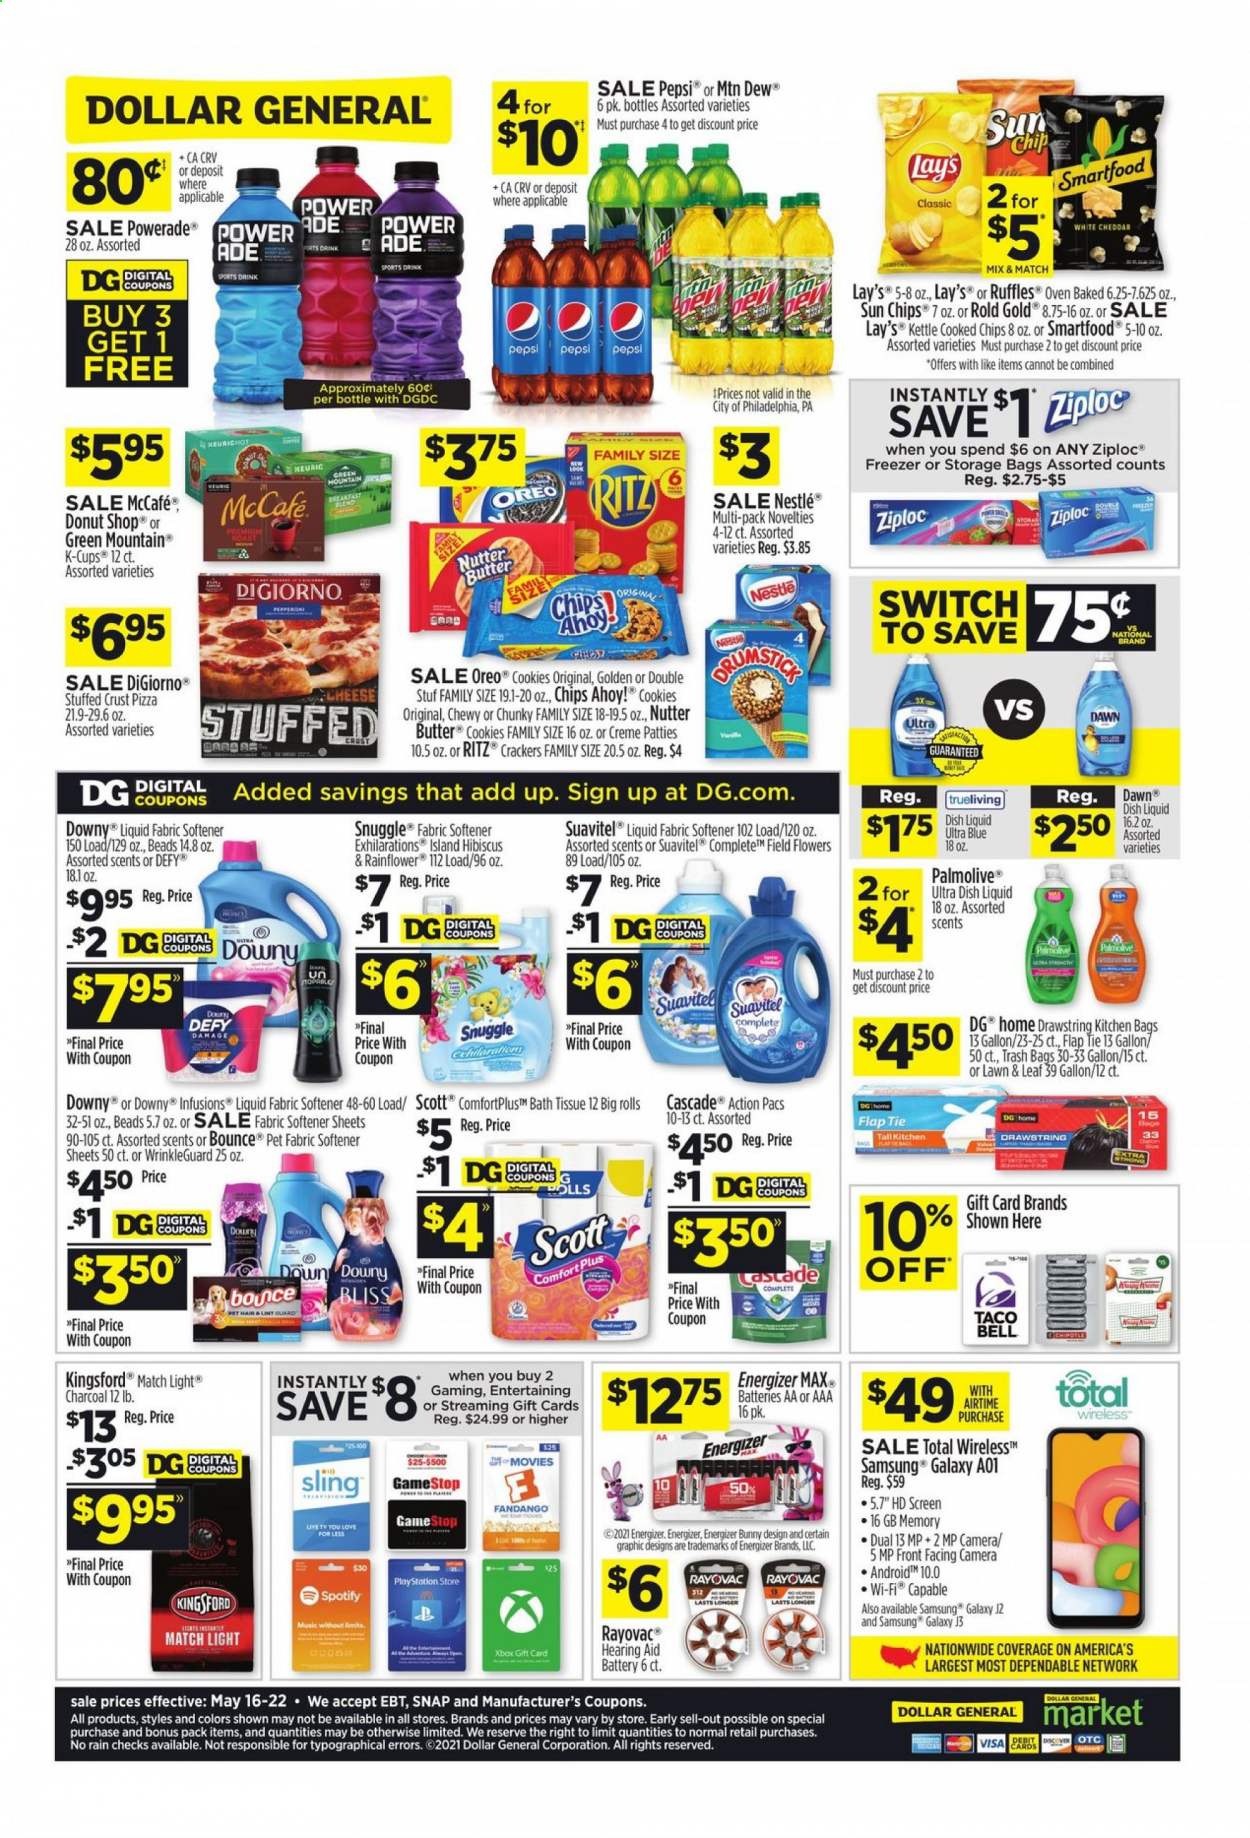 thumbnail - Dollar General Flyer - 05/16/2021 - 05/22/2021 - Sales products - Scott, Samsung Galaxy, pizza, Oreo, butter, cookies, Nestlé, crackers, Chips Ahoy!, RITZ, chips, Lay’s, Smartfood, Ruffles, Mountain Dew, Powerade, Pepsi, coffee capsules, McCafe, K-Cups, Green Mountain, bath tissue, Cascade, Snuggle, fabric softener, Bounce, Downy Laundry, dishwashing liquid, Palmolive, Ziploc, trash bags, storage bag, battery, Energizer, Samsung Galaxy A01, Xbox, freezer, oven, kettle, bag, doll, switch, charcoal, Kingsford, car battery. Page 2.